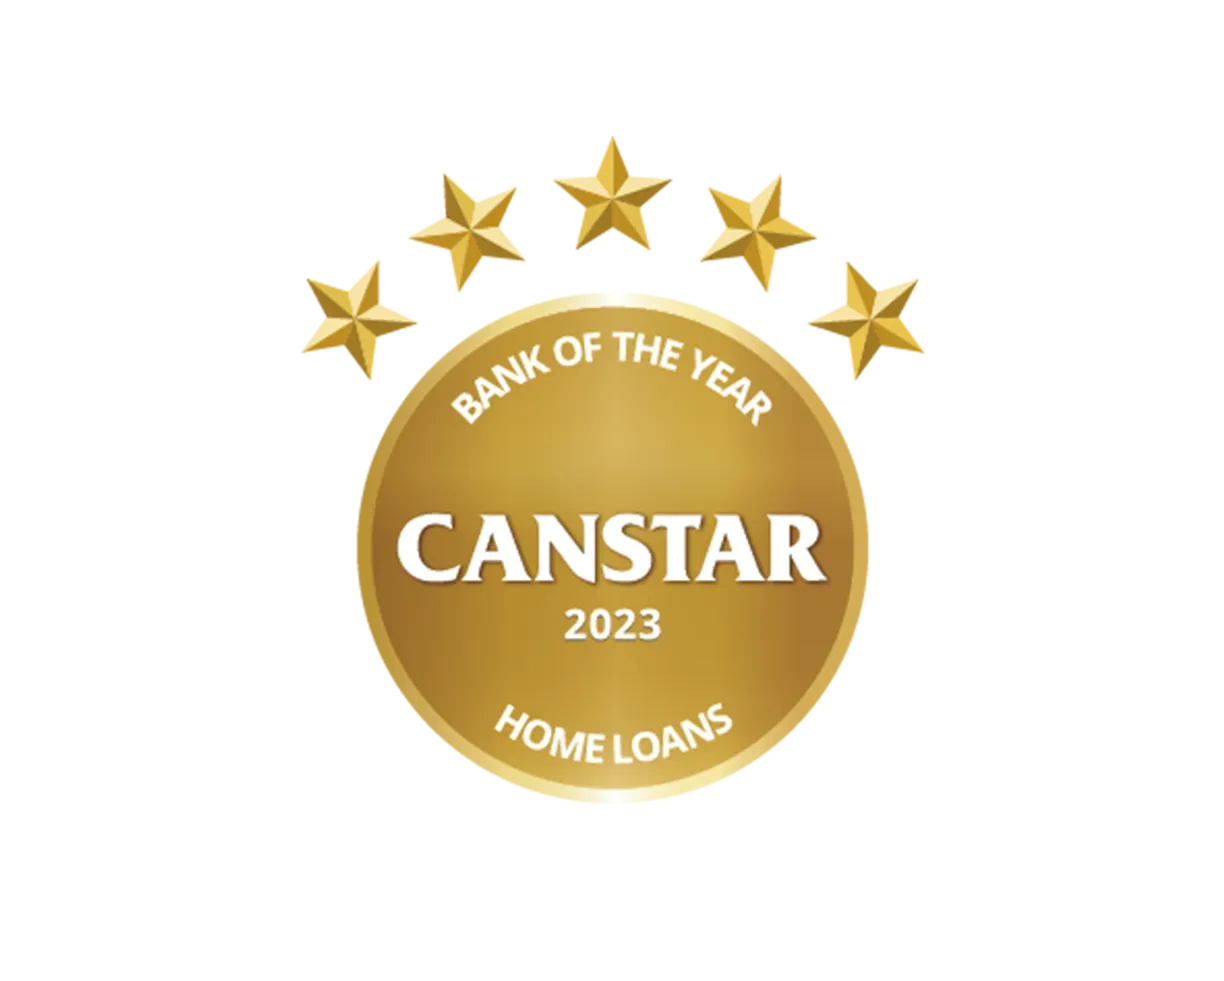 Canstar Bank of the Year, home loans